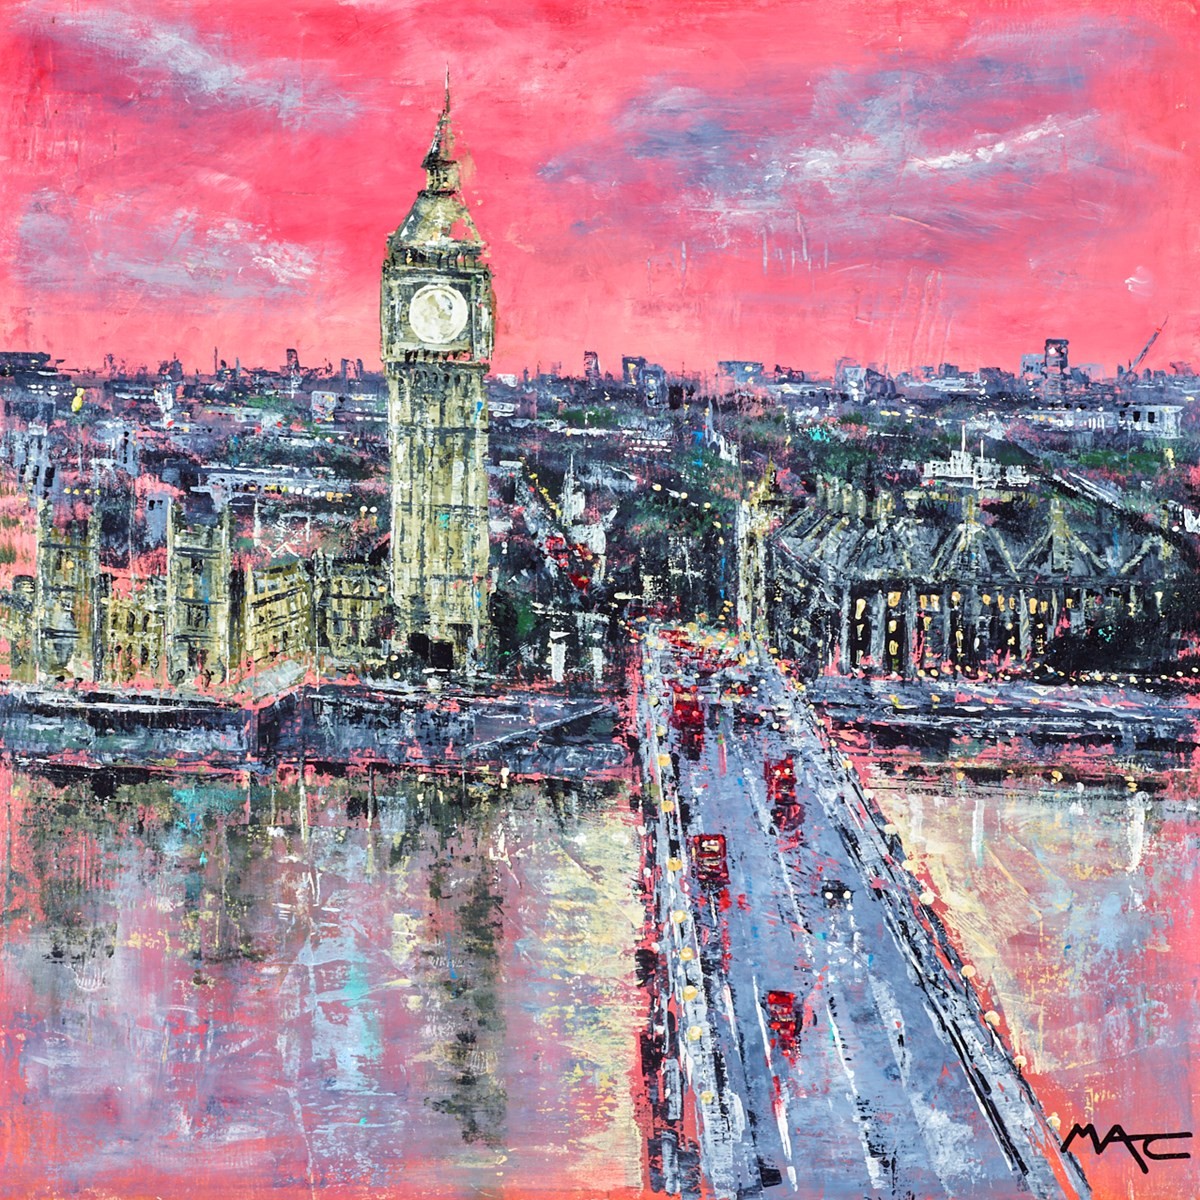 Westminister Sunsets. A painting by Mark Curryer showing big ben and Westminster at sun set with a pink and red sky.